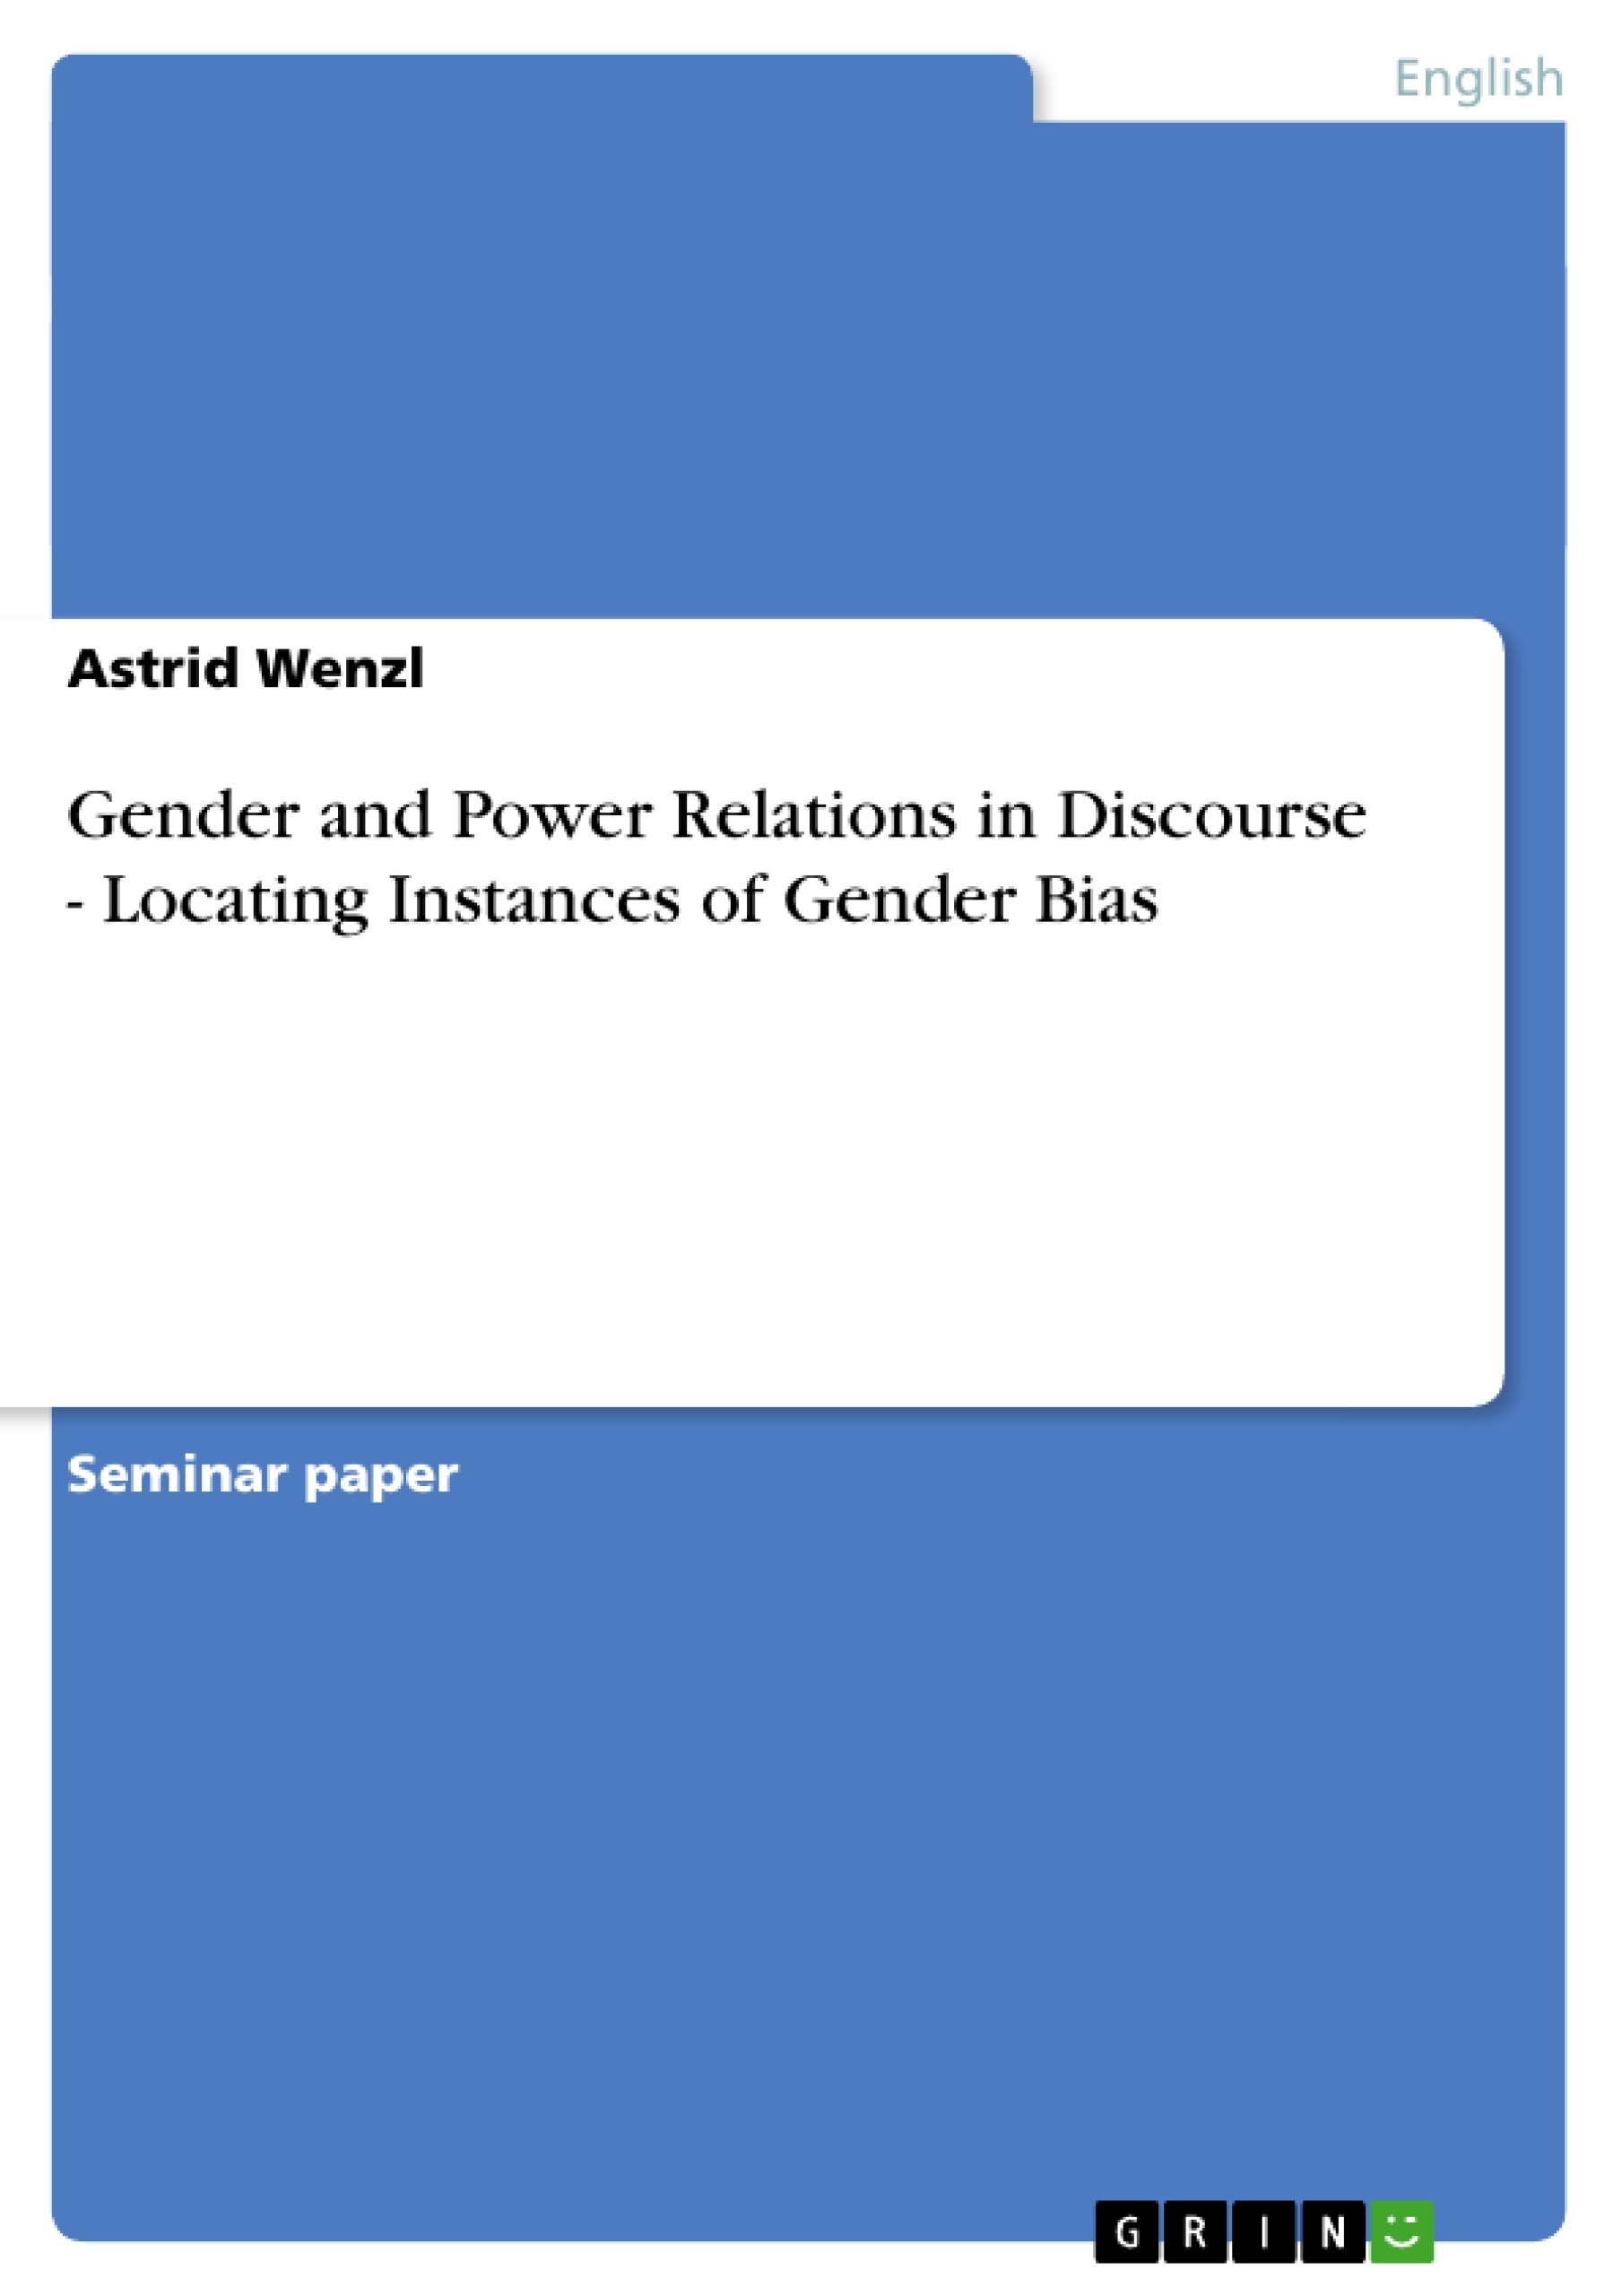 Title: Gender and Power Relations in Discourse - Locating Instances of Gender Bias